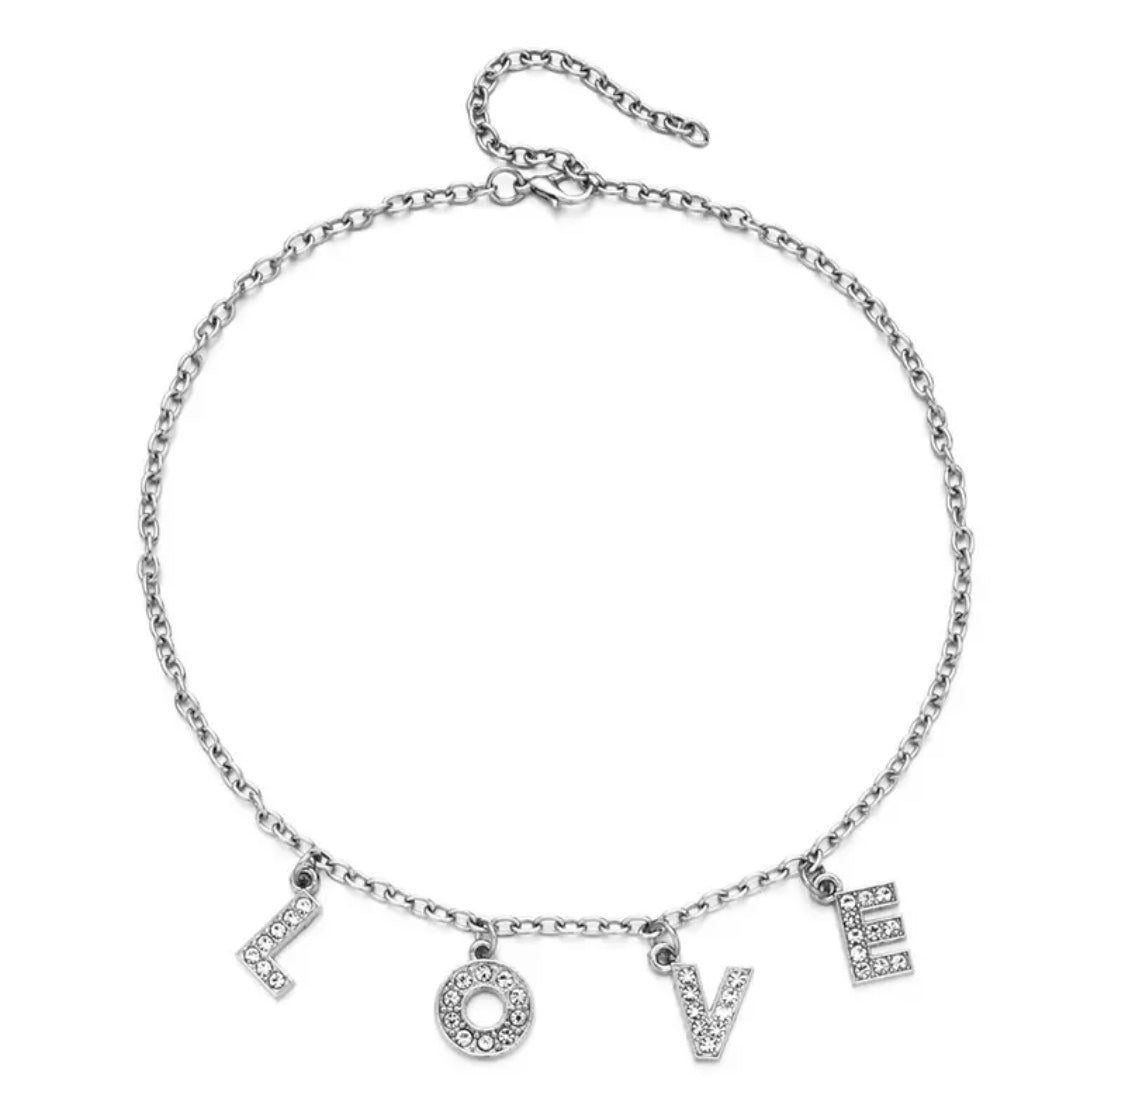 DDLGVERSE Love Silver Plated Necklace